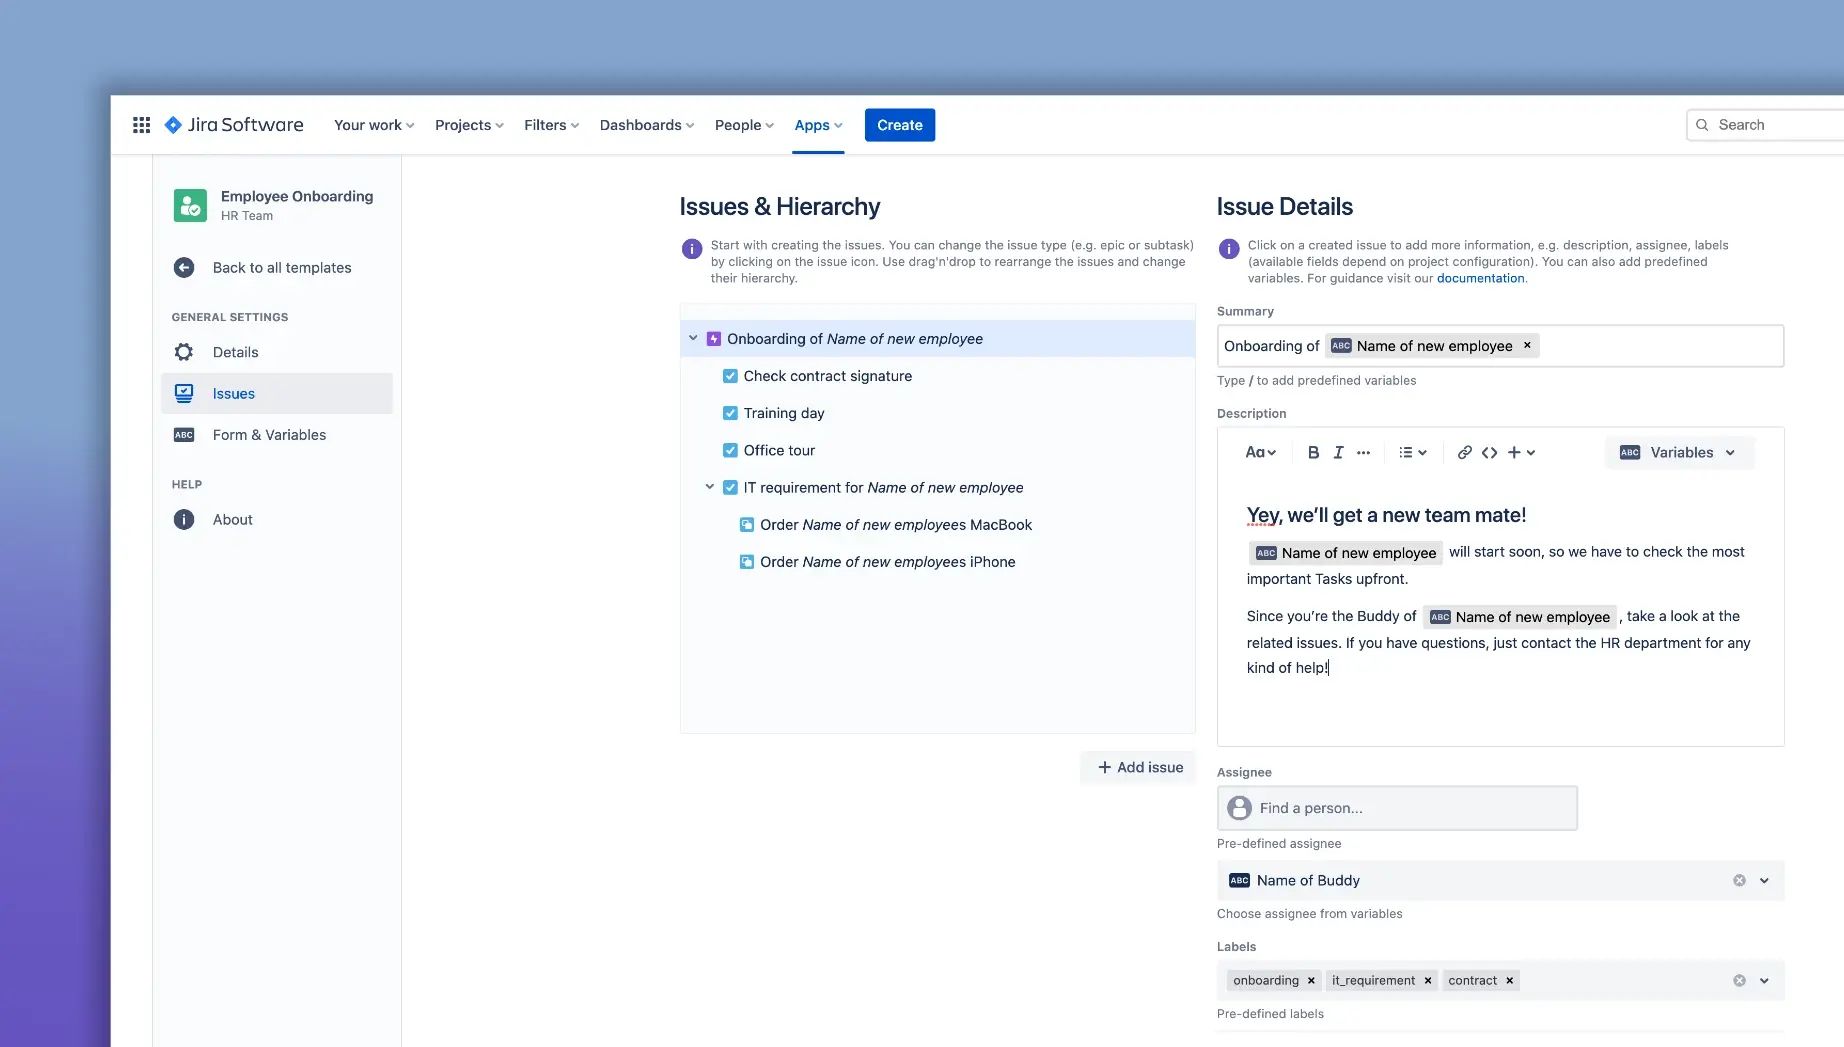 Templates for Sub-tasks for Jira Cloud Issues - creating a template